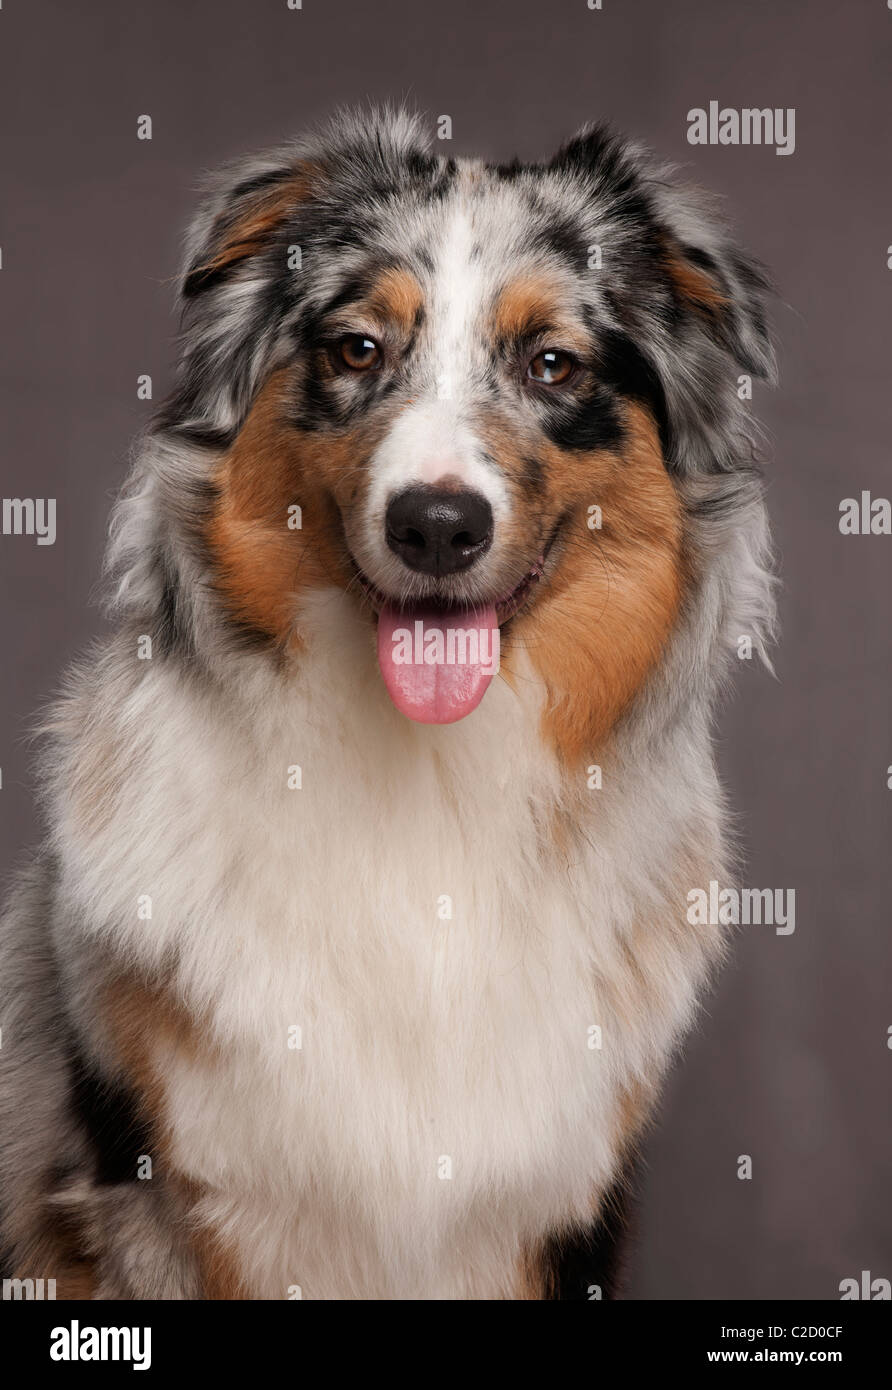 Australian Shepherd, 10 months old, in front of grey background Stock Photo